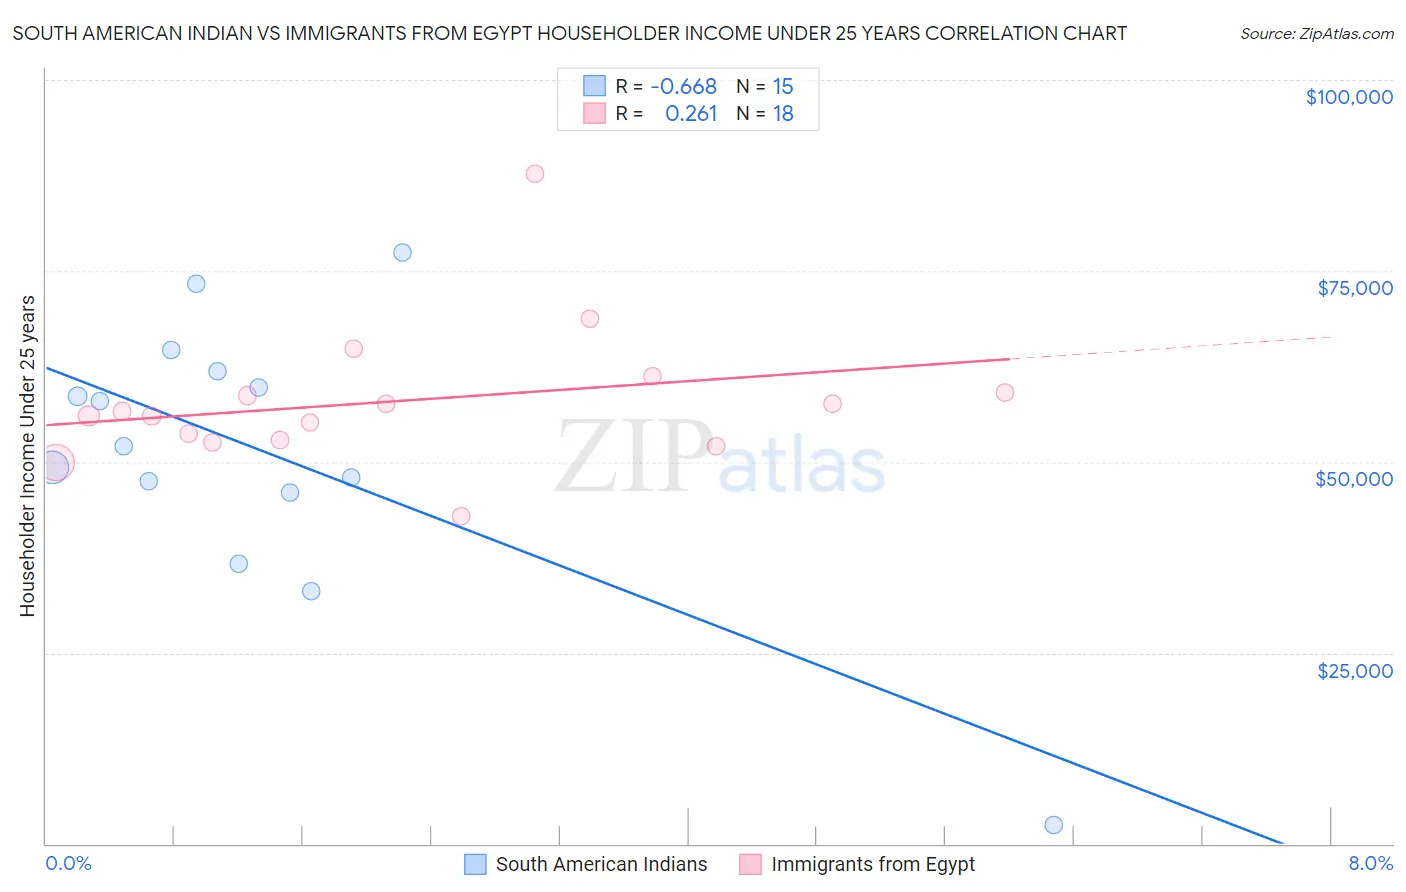 South American Indian vs Immigrants from Egypt Householder Income Under 25 years